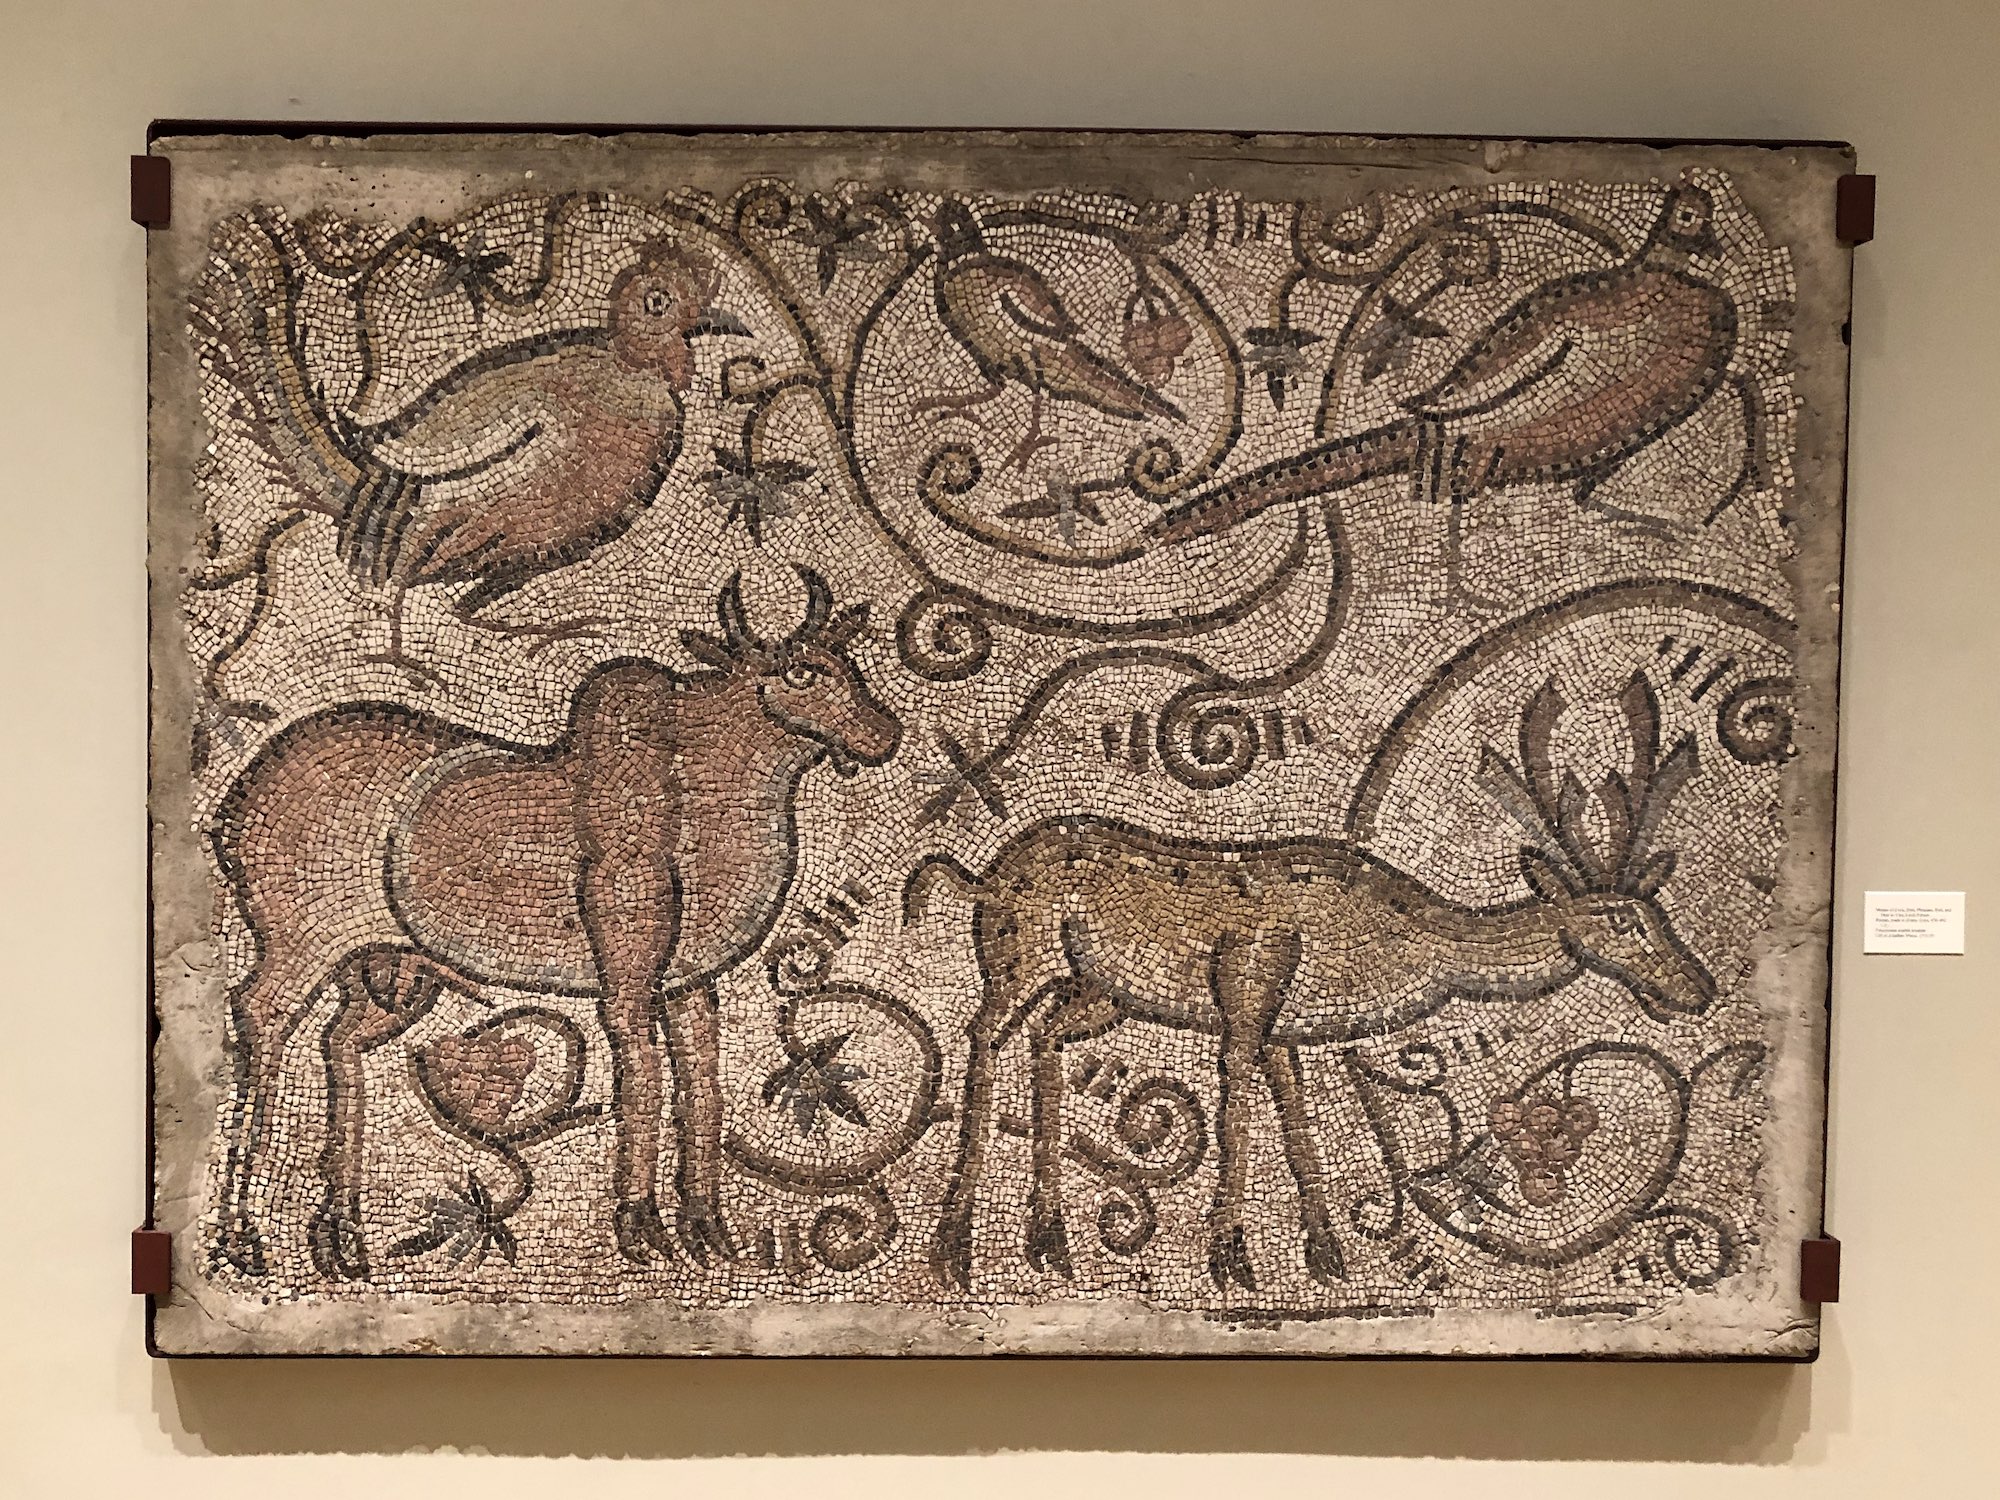 Roman Mosaic of Cock, Bird, Pheasant, Bull, and Deer in Vine Scroll Pattern at the Chazen Museum of Art in Madison Wisconsin.